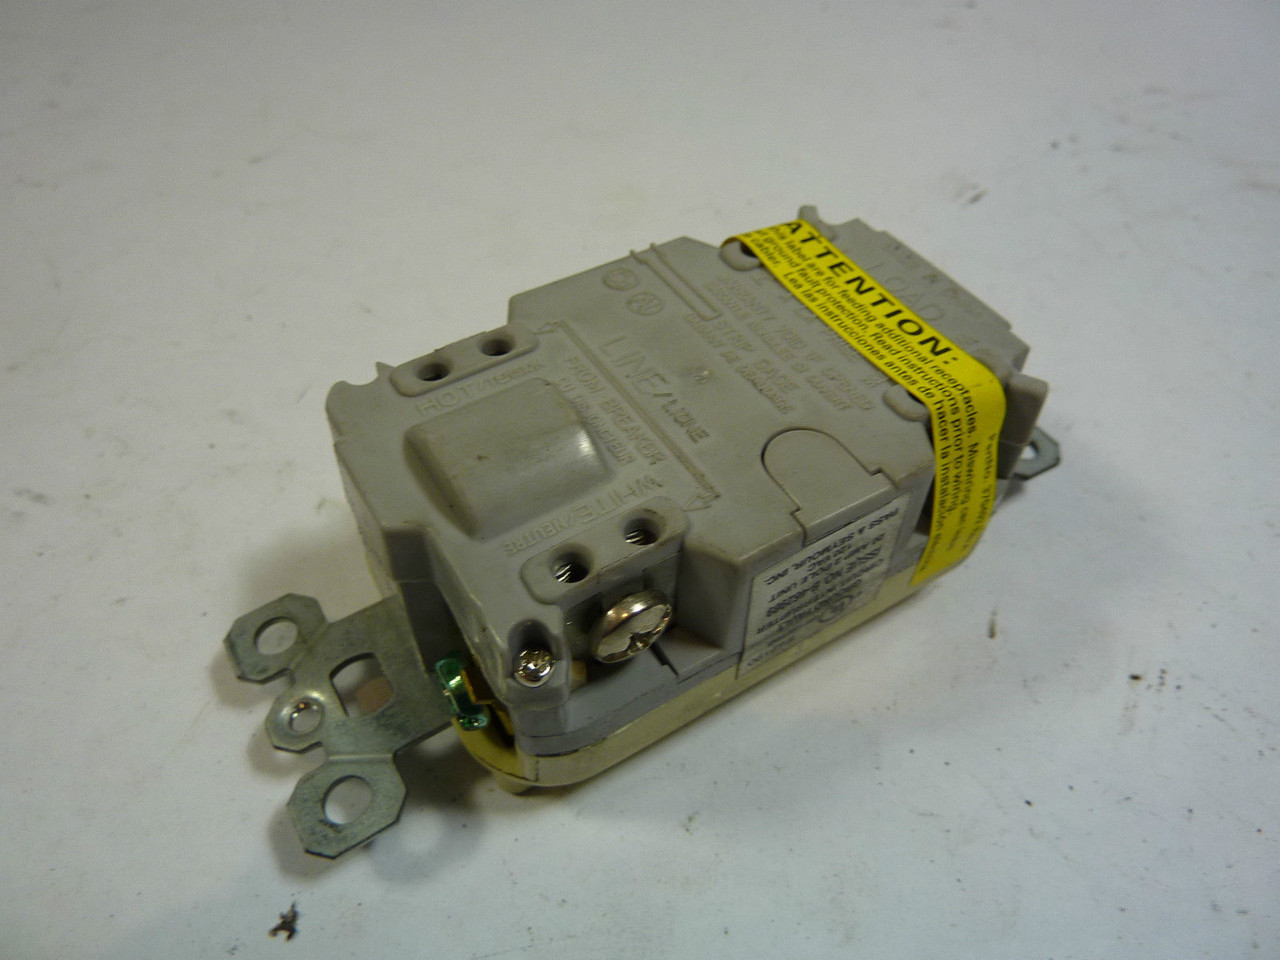 Pass Seymour B-462989 Receptacle 20 Amp 120V USED